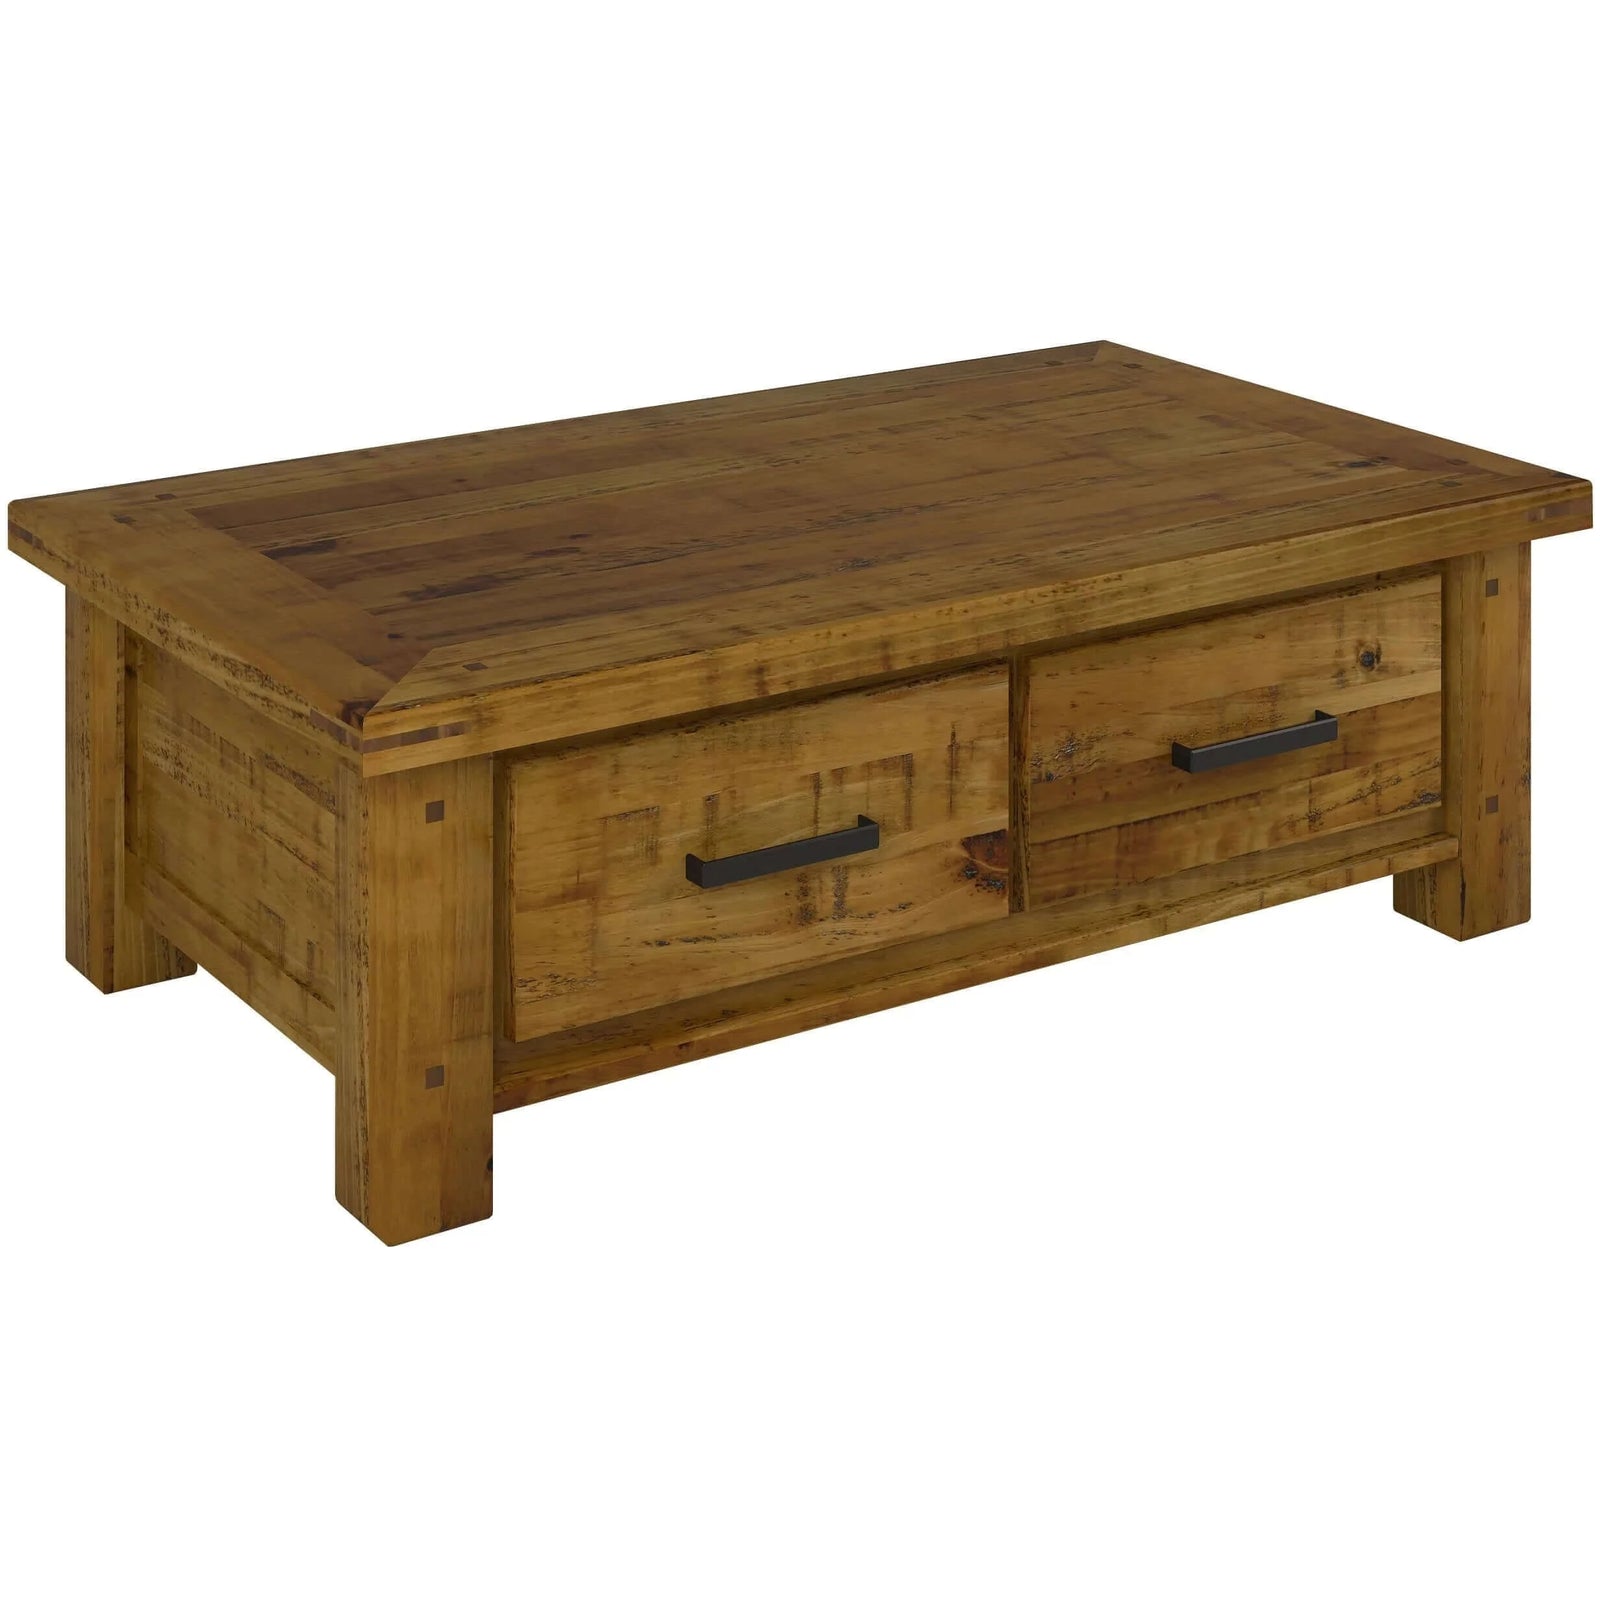 Teasel Coffee Table 140cm Solid Pine Timber Wood - Rustic Oak-Upinteriors